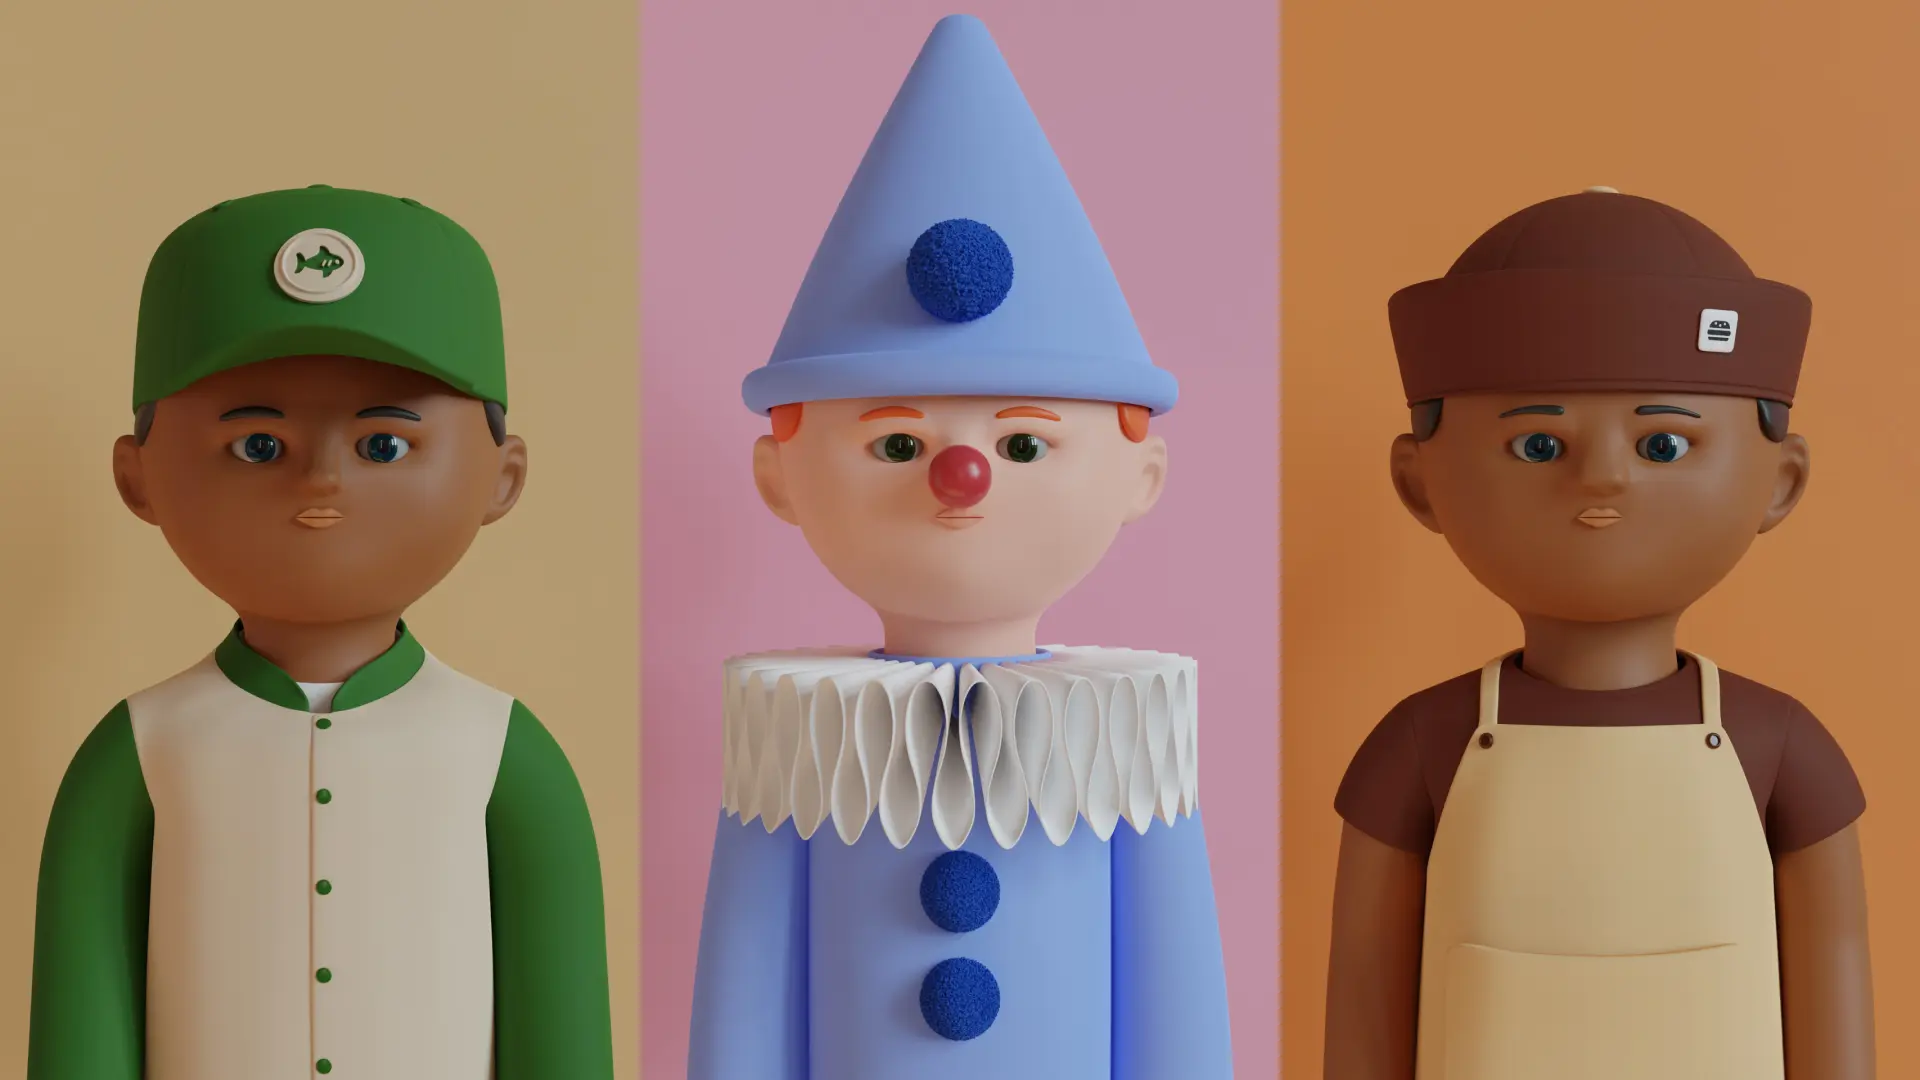 Three stylized figures with distinct hats: left with a green cap, center in a blue party hat, right in a brown baker's cap, against tri-color background.